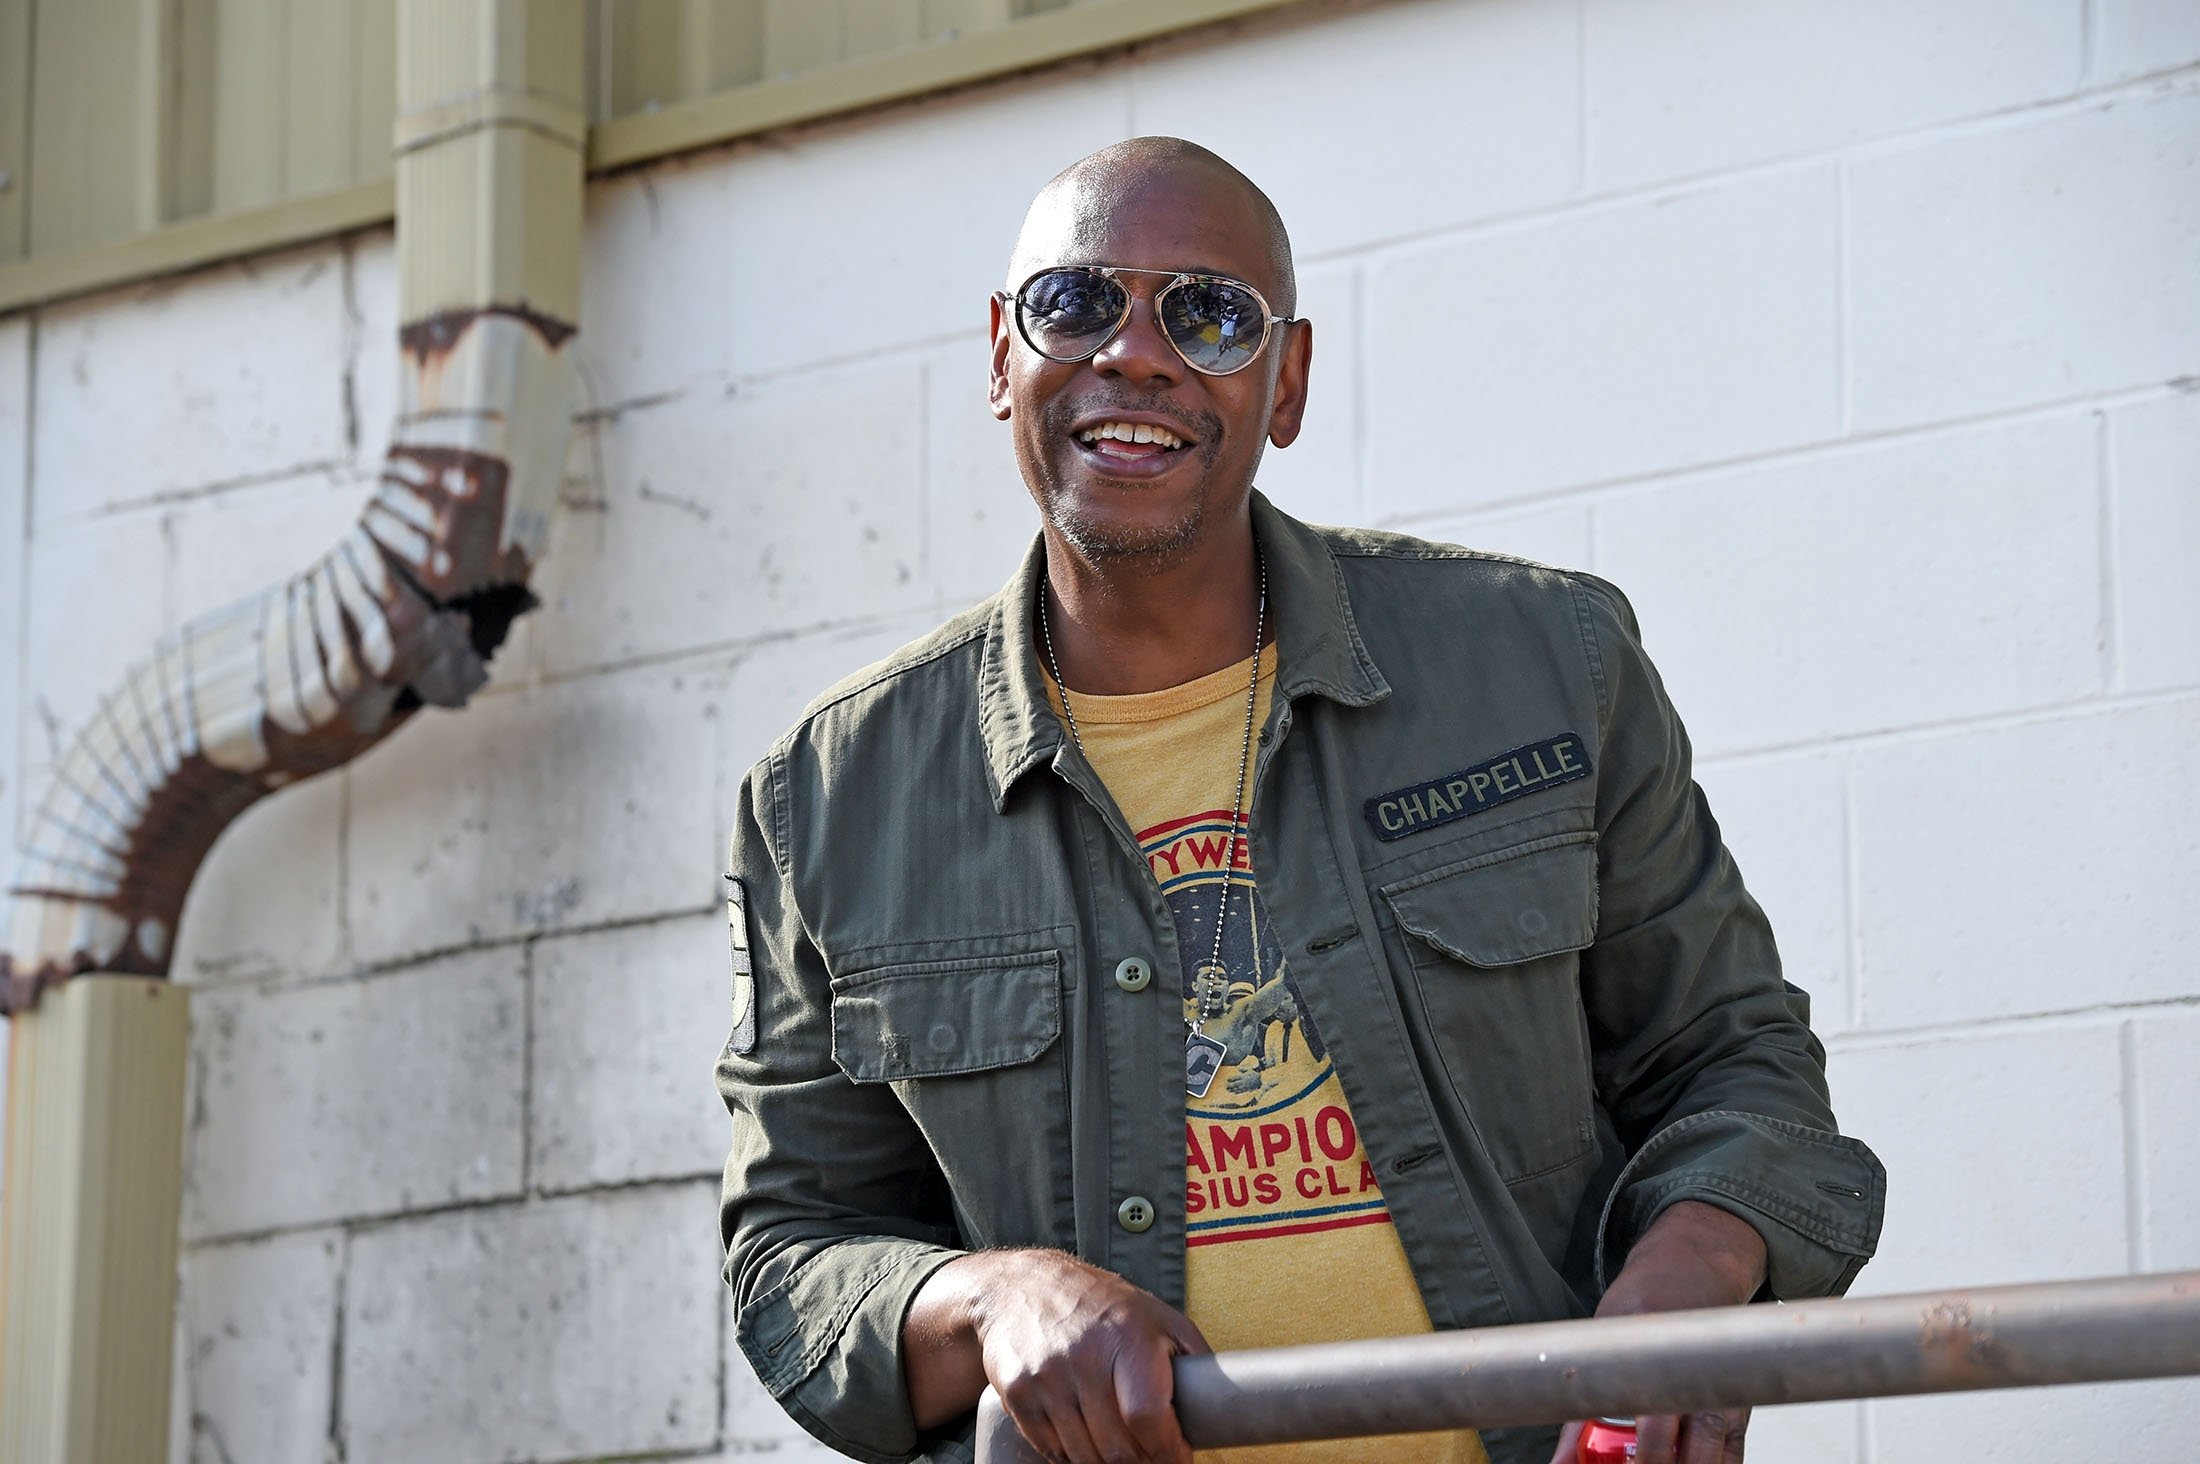 Dave Chappelle attends 'Dave Chappelle's Block Party,' in Dayton, Ohio, U.S., Aug. 25, 2019. (Getty Images)